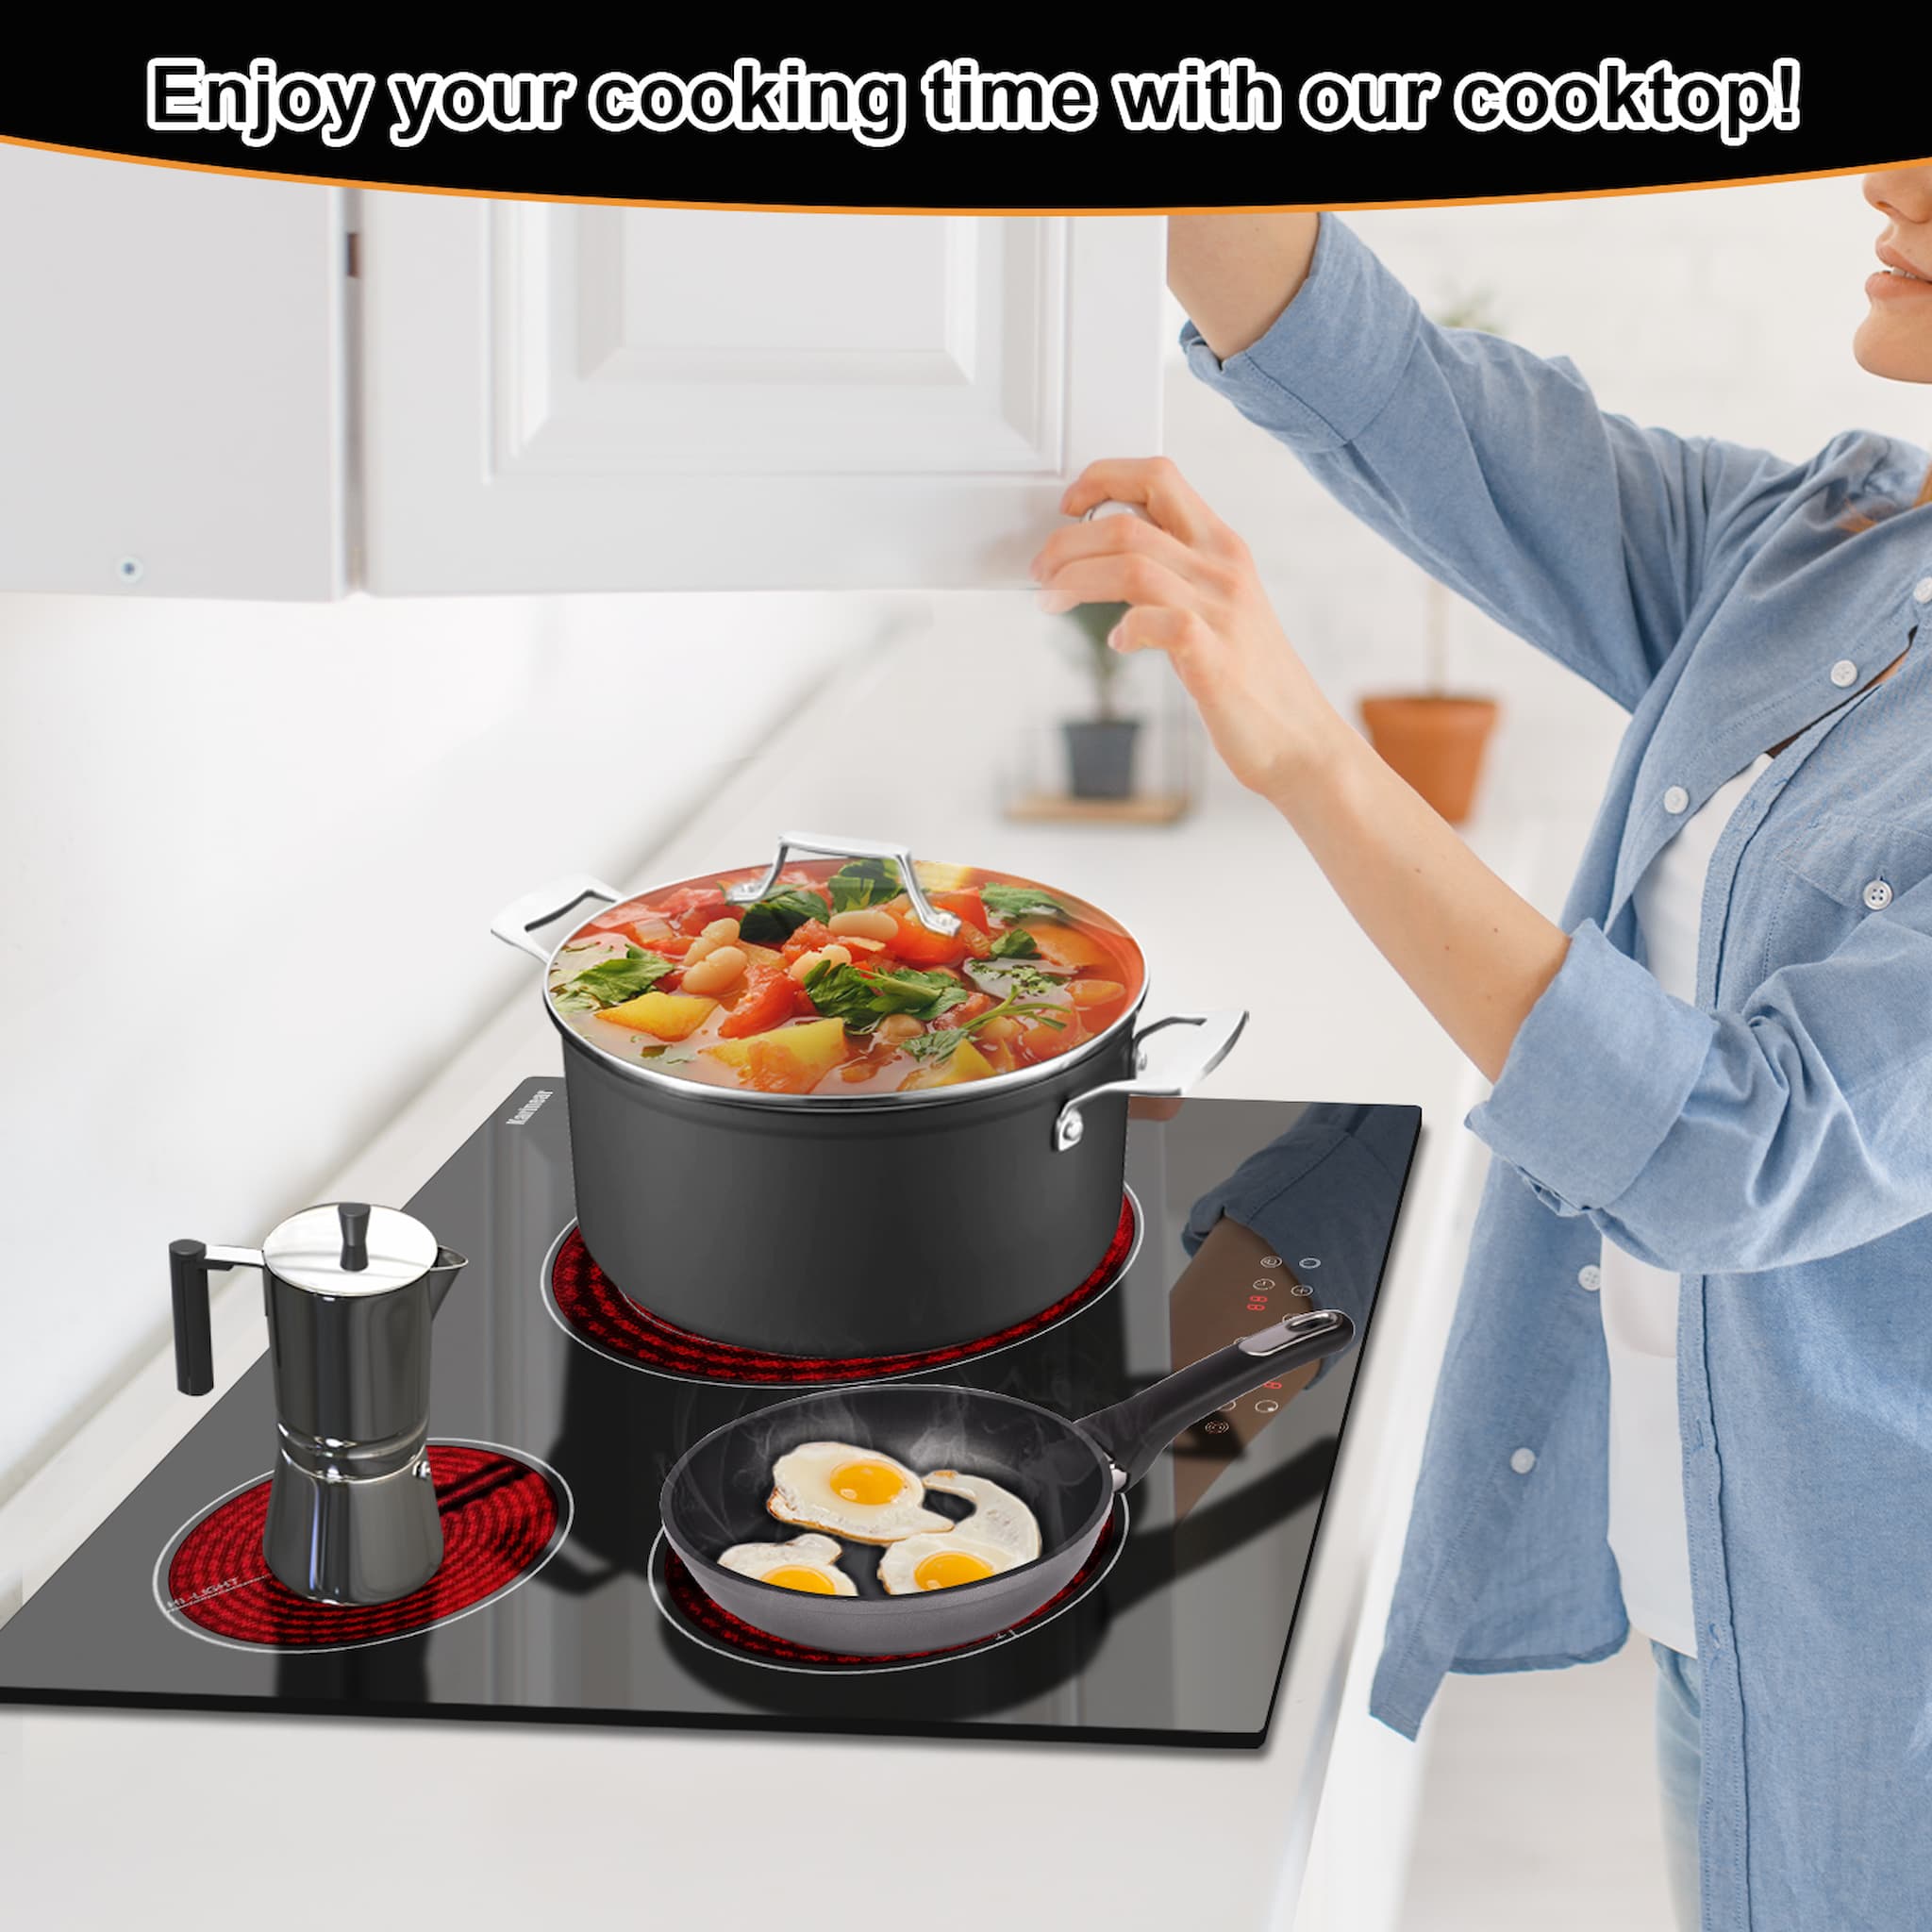  Electric Cooktop 30 inch,Electric Cooker 4 Burners, 6000W  Electric Stove Top 220-240v,Child Safety Lock without Plug Suitable for All  Pans : Home & Kitchen